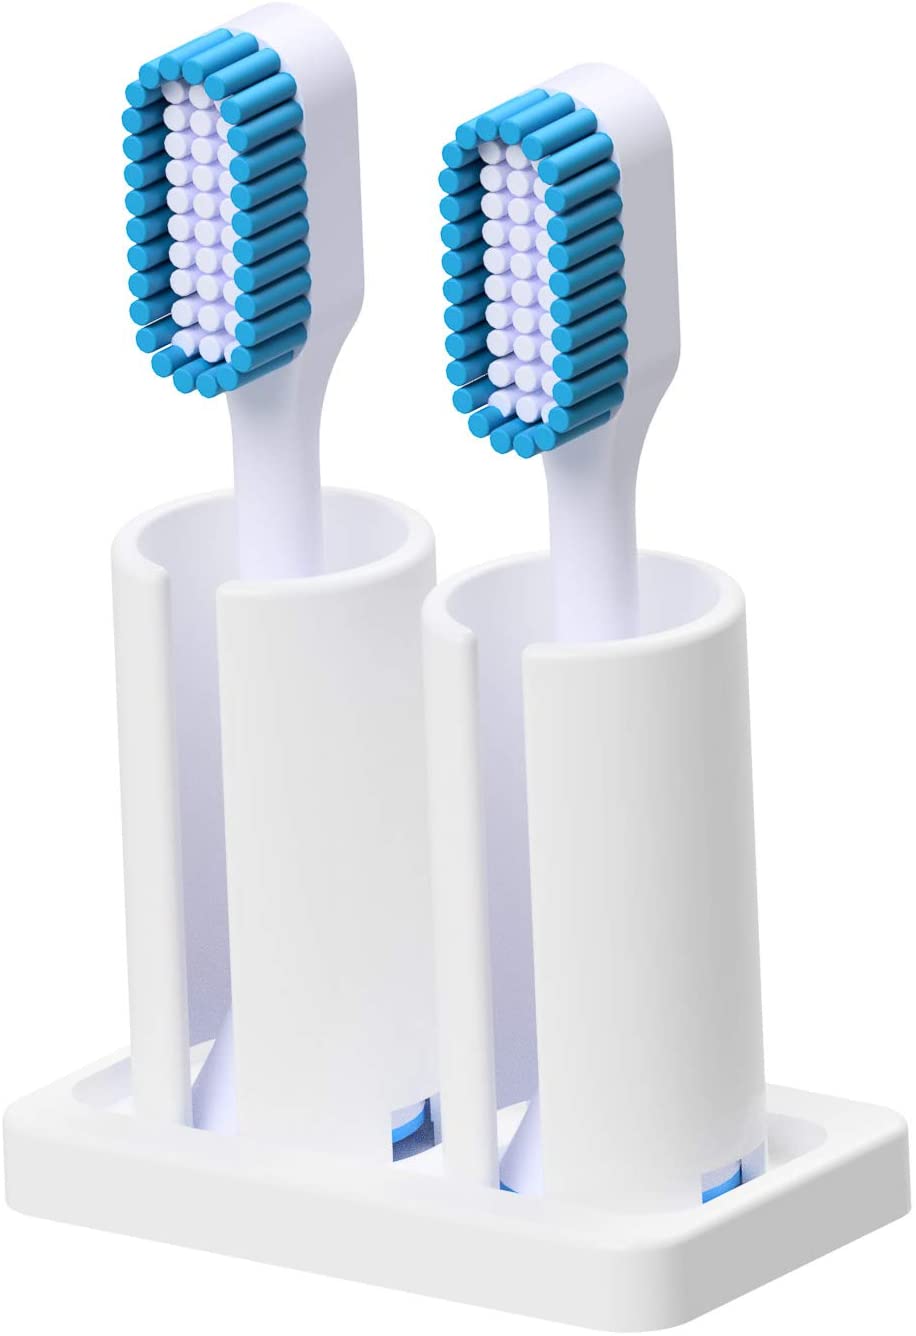 Artifex Compatible for Sonicare Tooth Brush Heads Holder